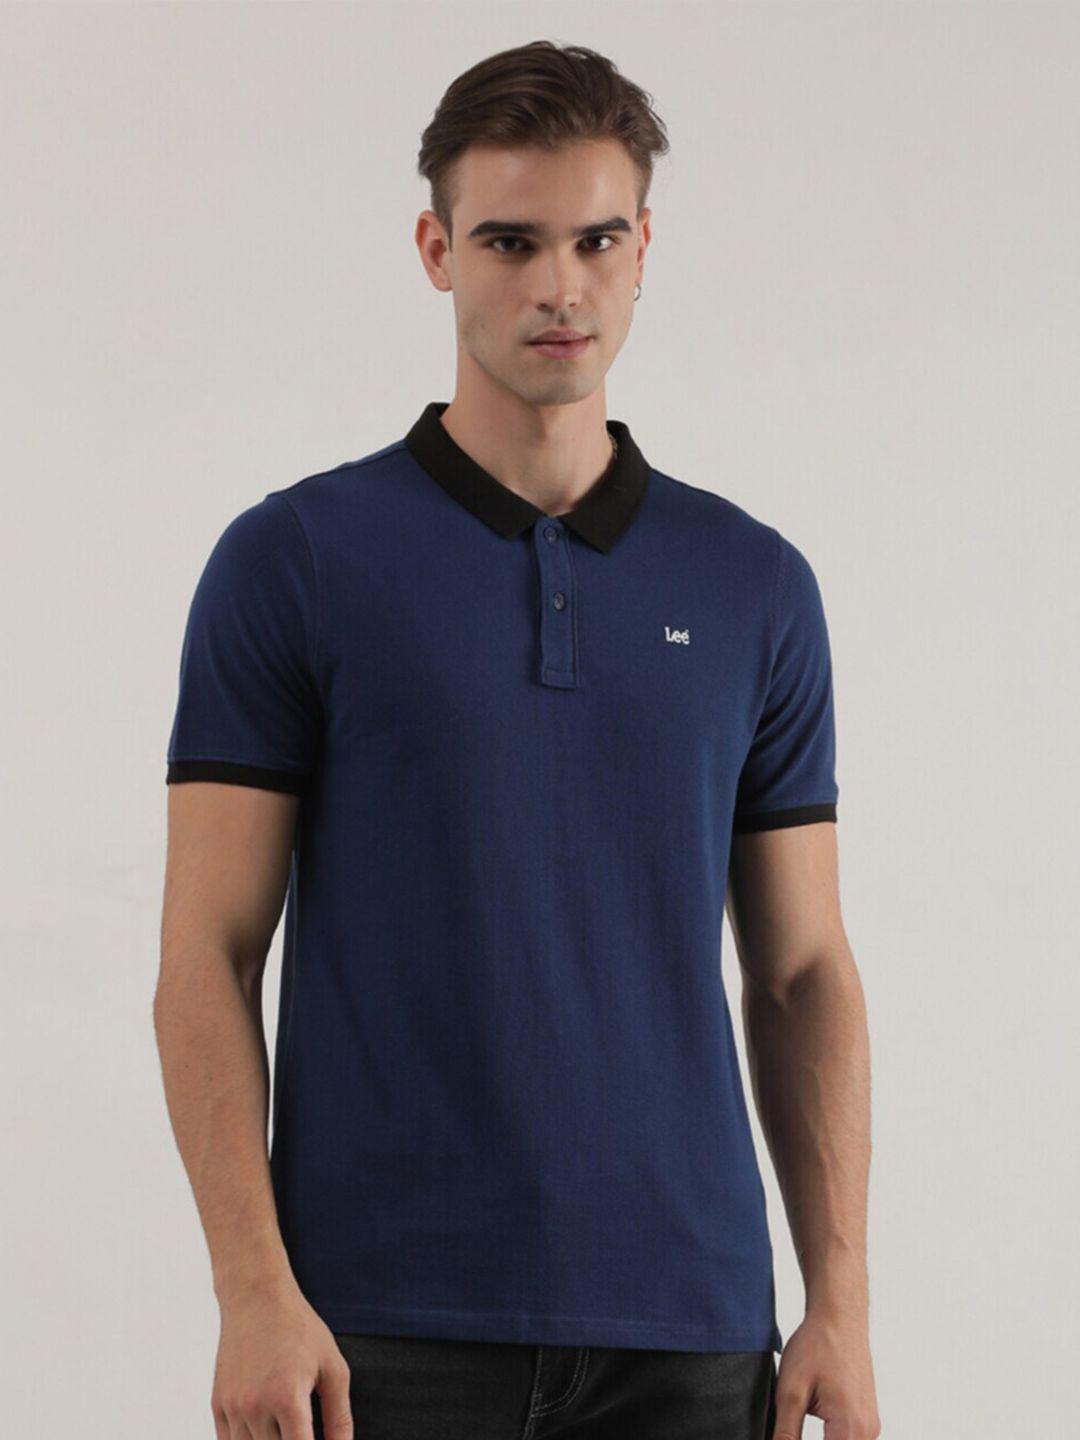 lee-polo-collar-cotton-slim-fit-t-shirt